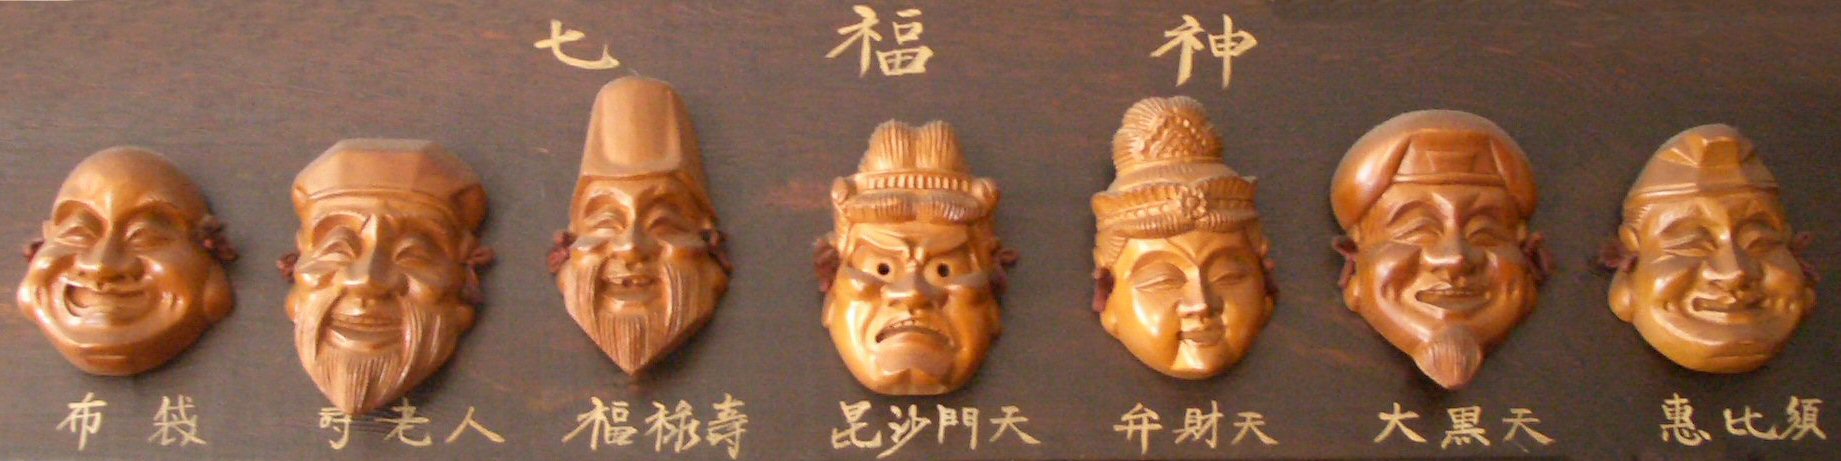 Bronze masks of the seven gods of fortune as portrayed by Japanese Folklore.